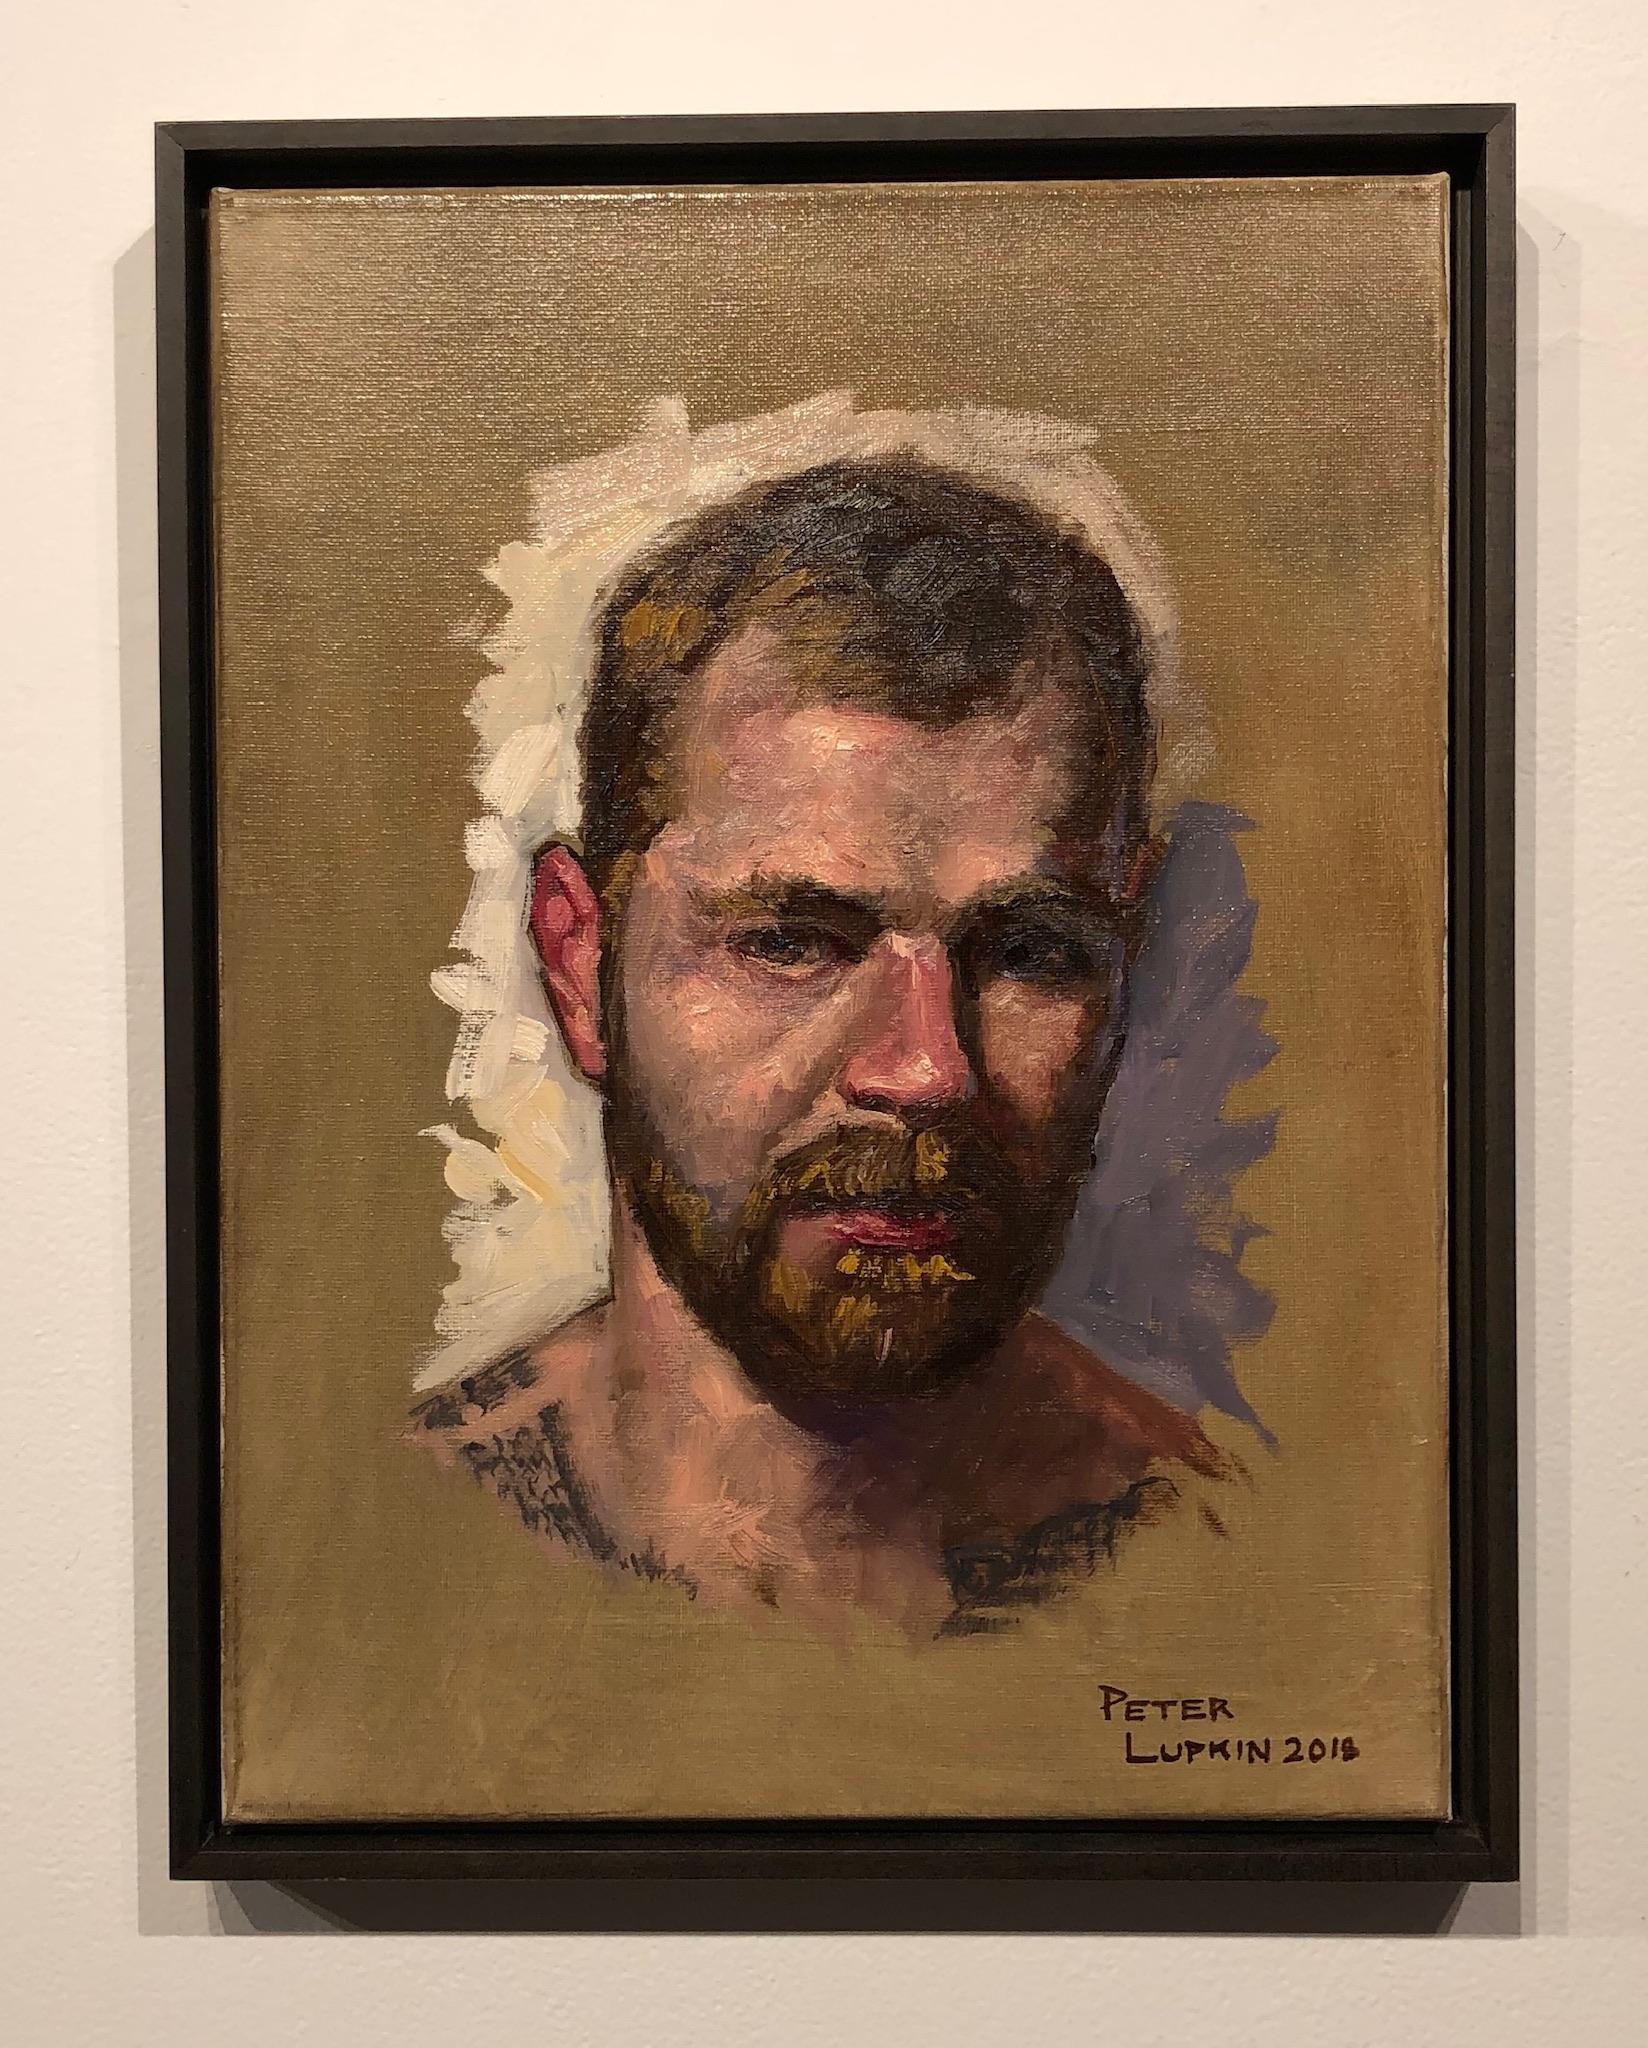 Doug, Male Figure with Tattoos, Full Beard and Mustache, Oil on Canvas, Framed - Painting by Peter Lupkin